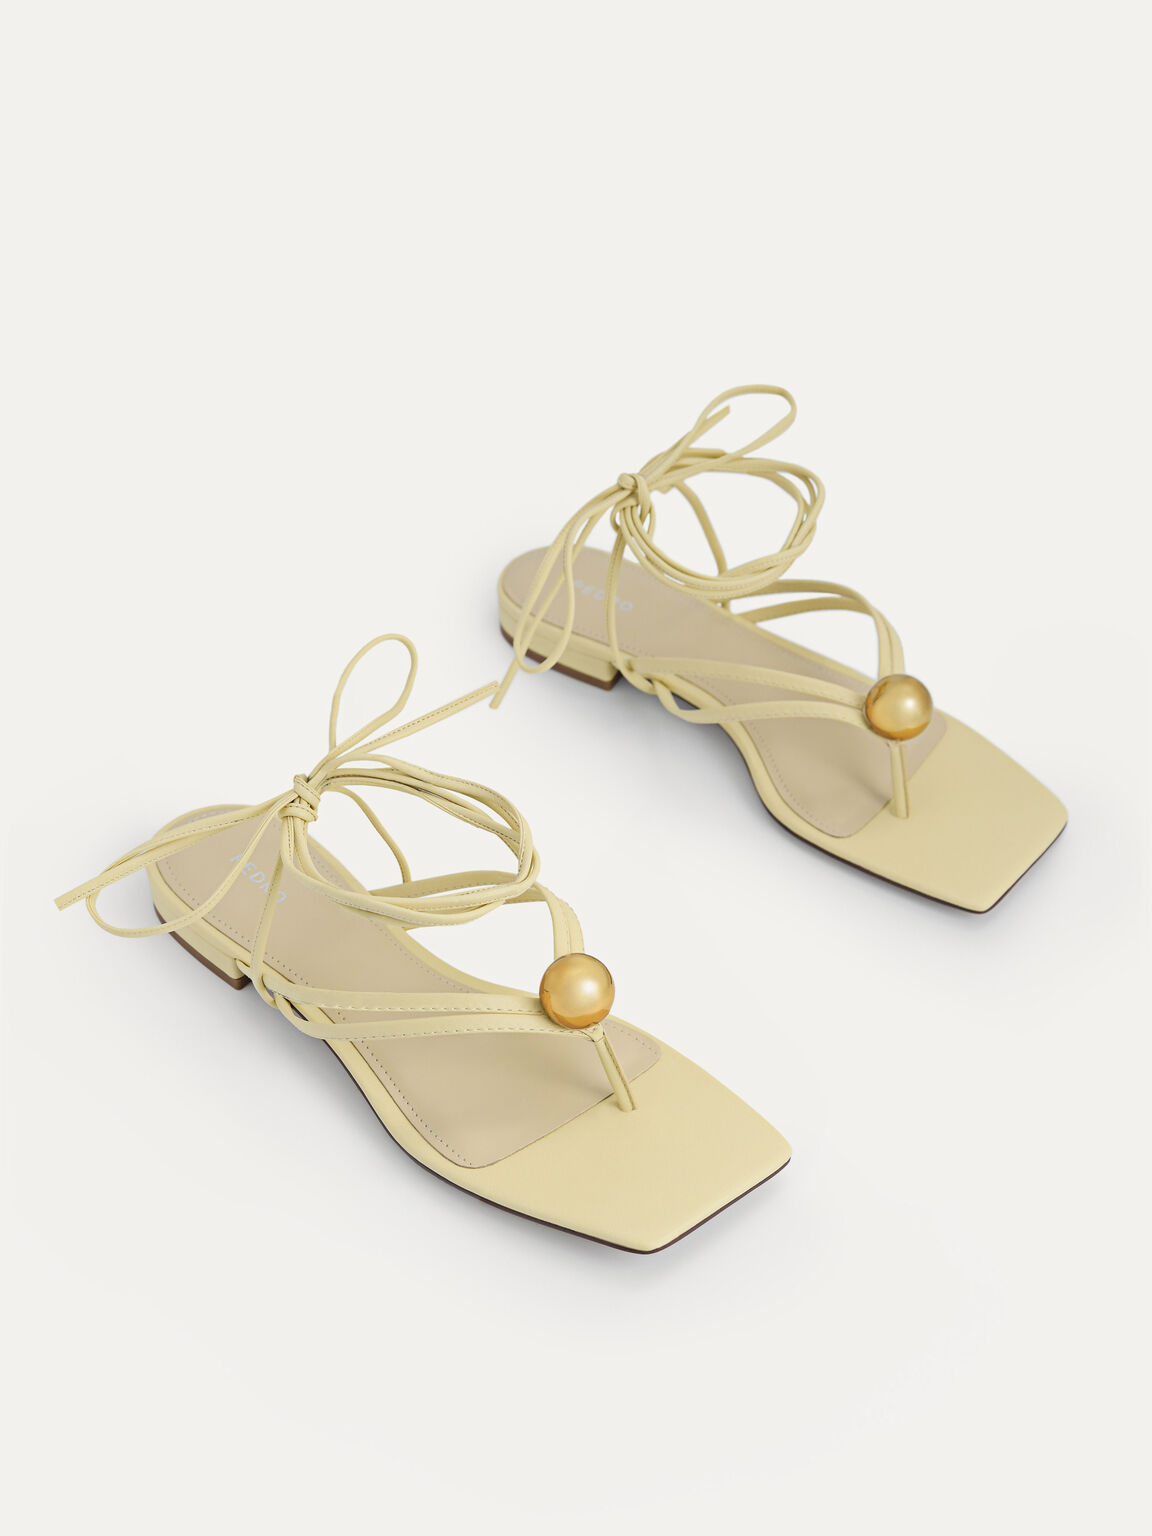 Orb Lace-Up Sandals, Light Yellow